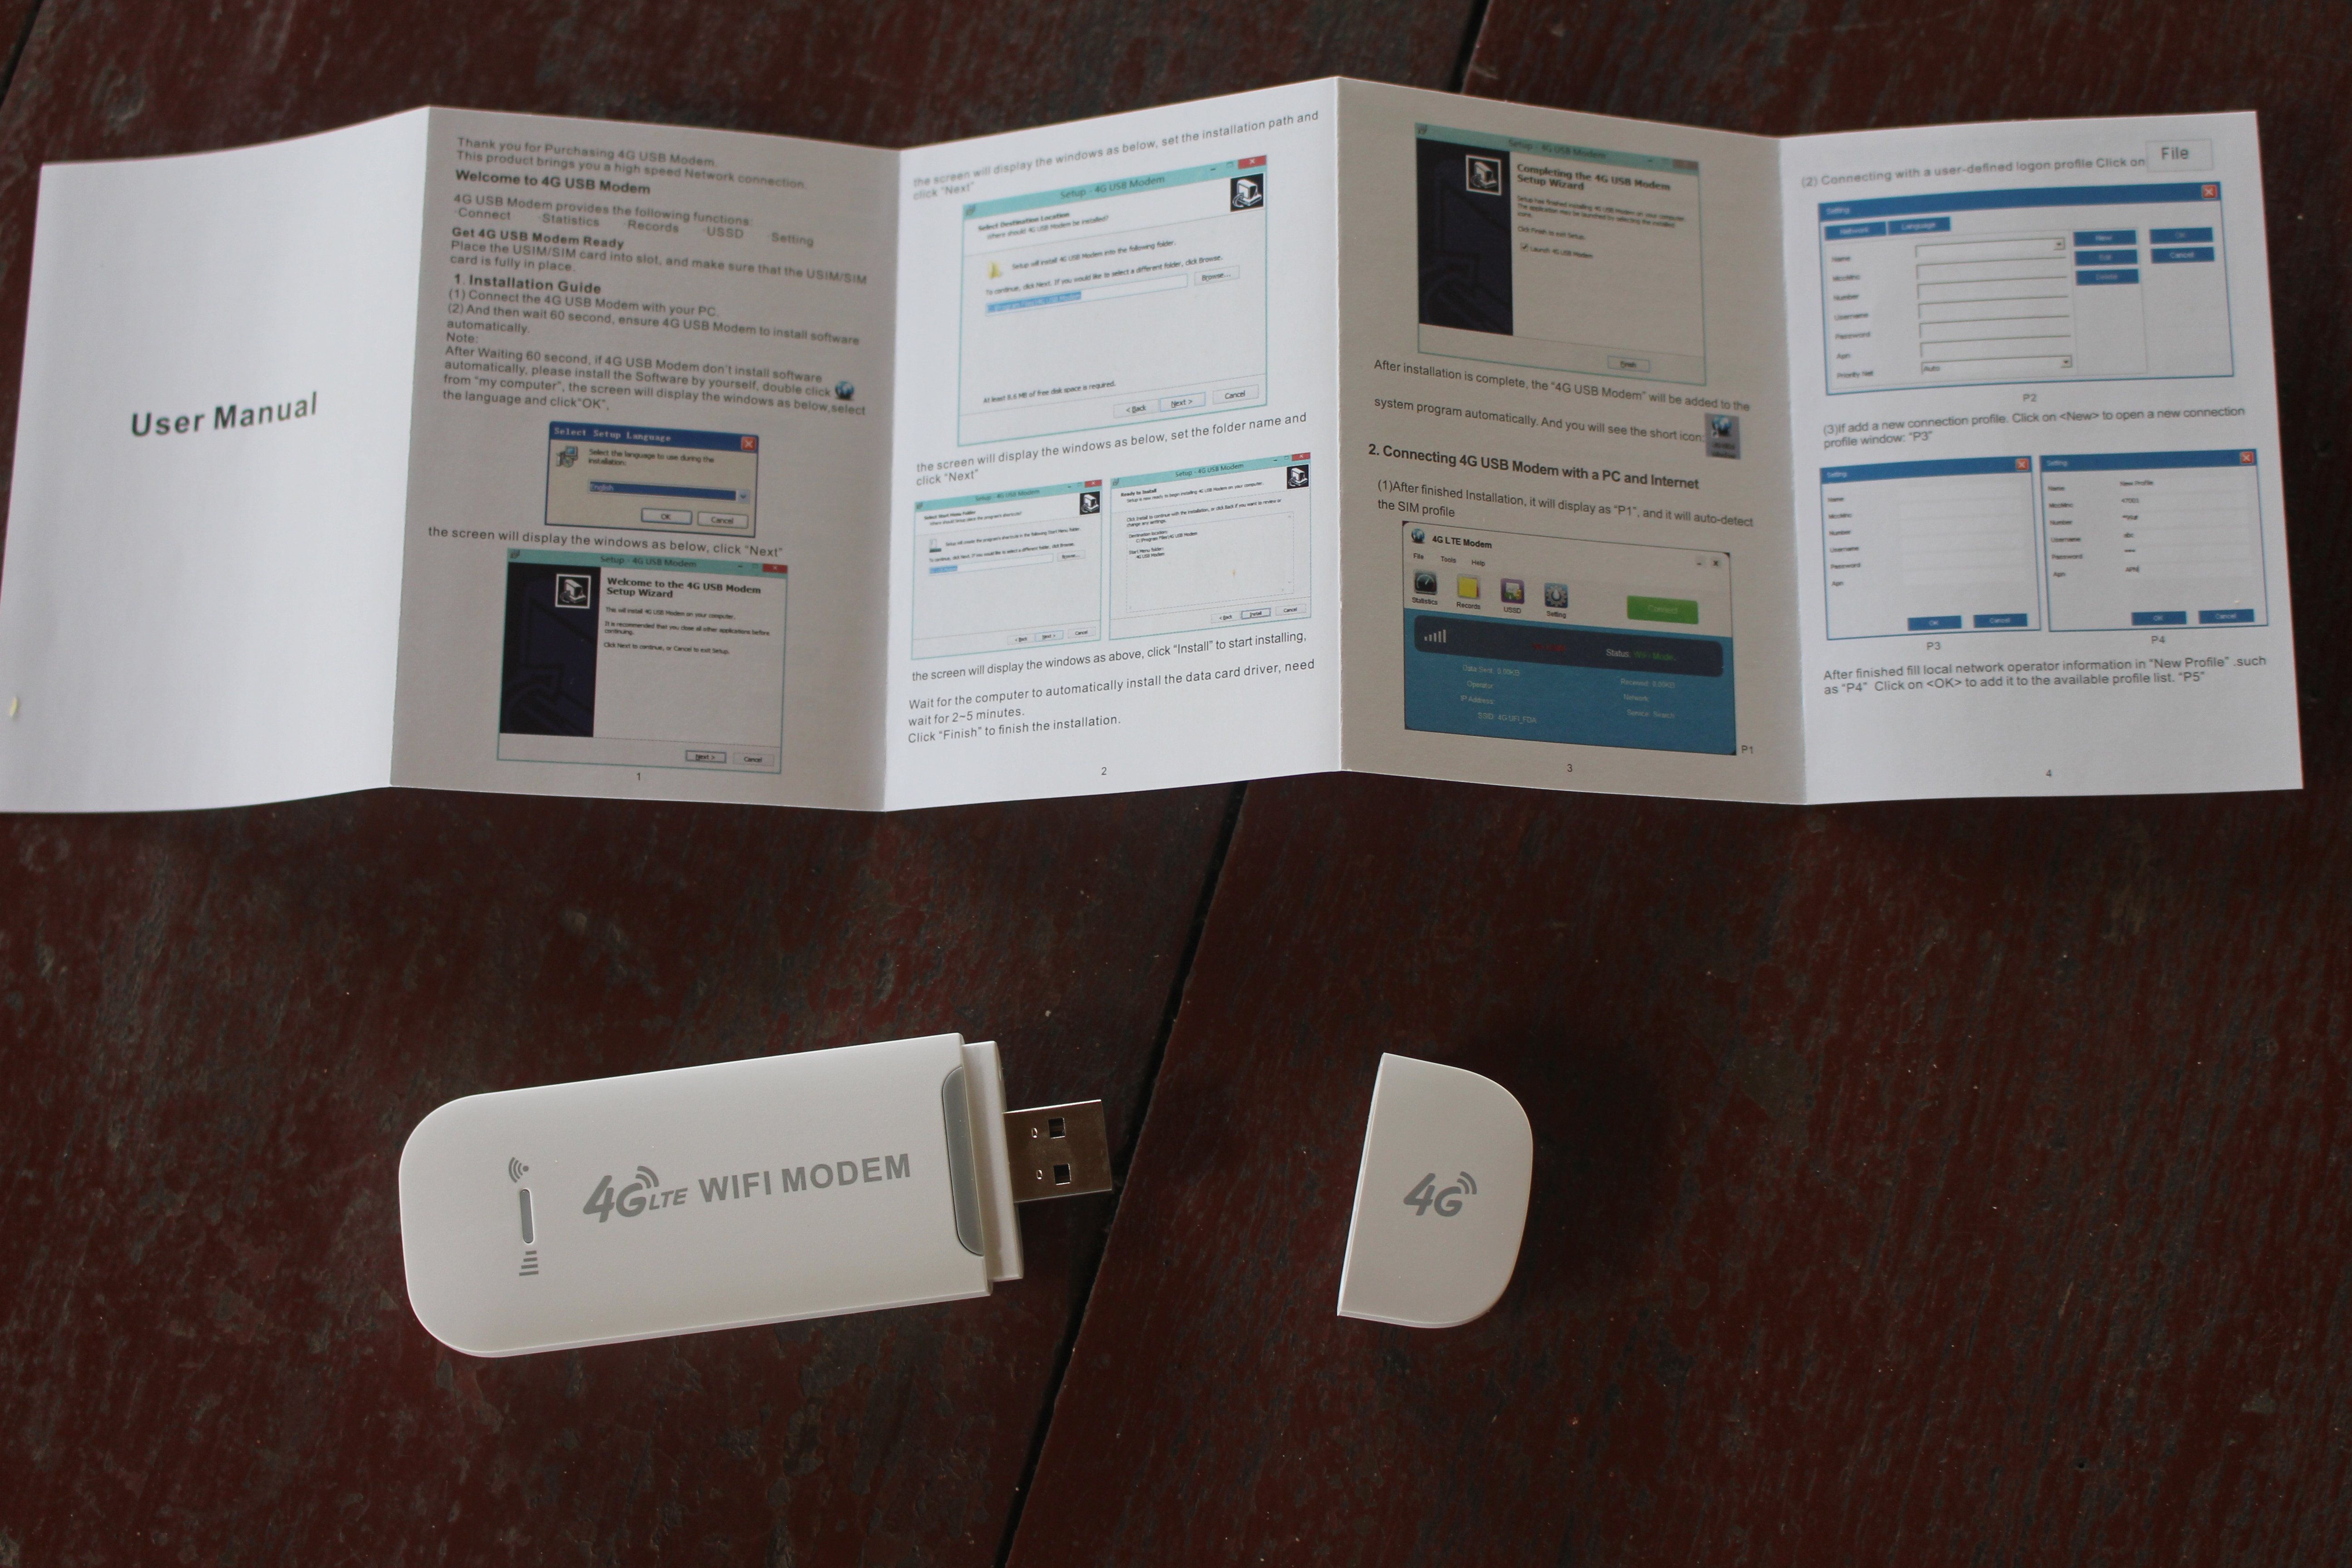 deal with concern Secondly Review of "4G LTE WiFi Modem" hotspot - CNX Software